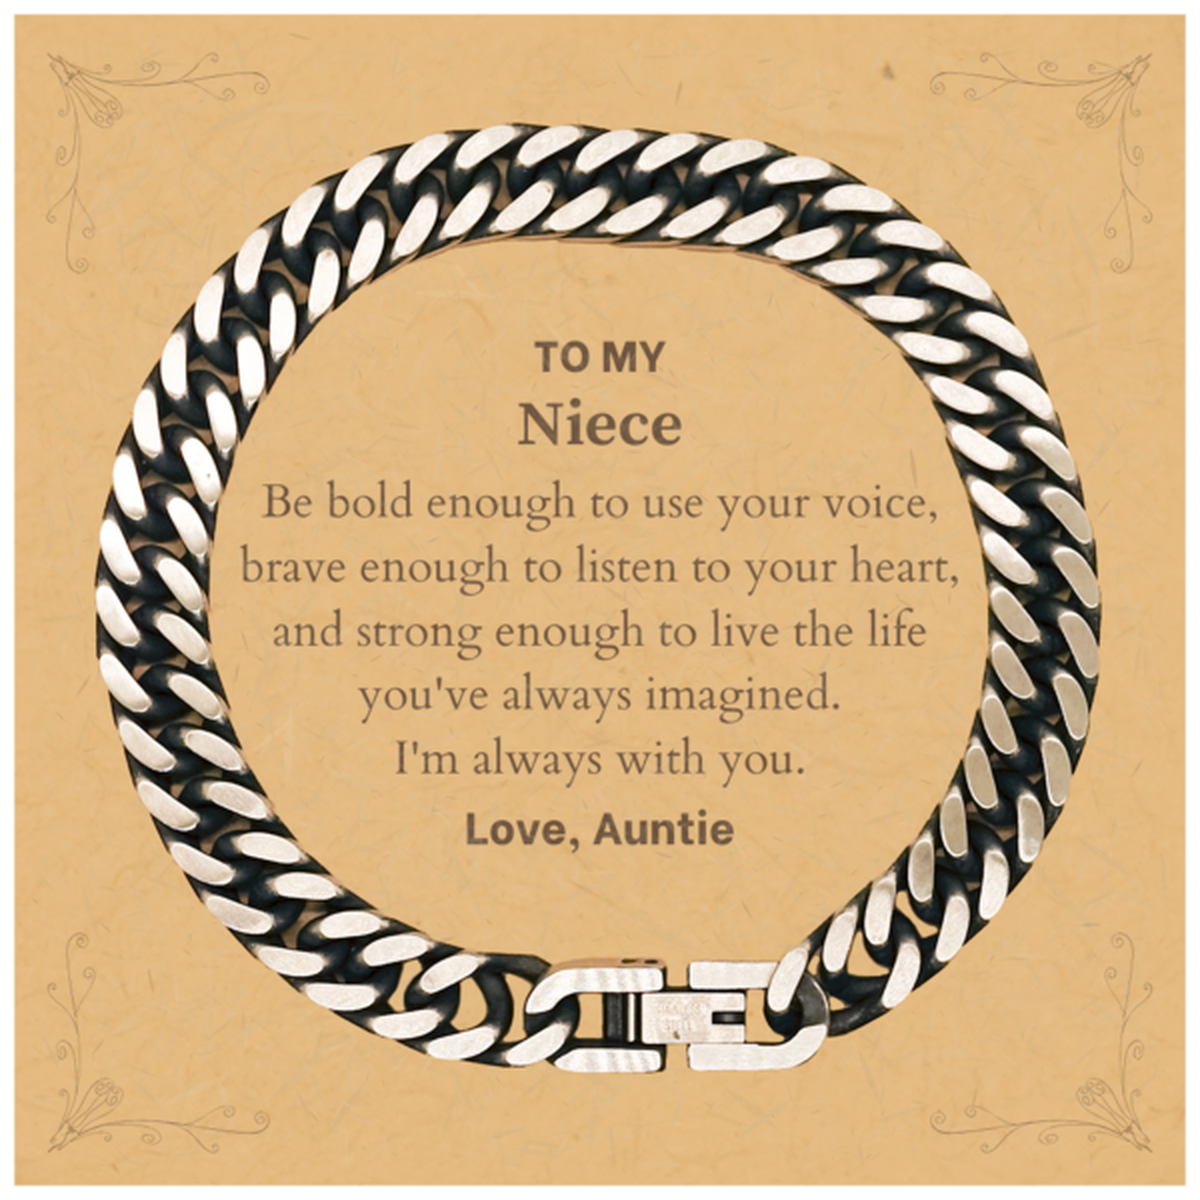 Keepsake Niece Cuban Link Chain Bracelet Gift Idea Graduation Christmas Birthday Niece from Auntie, Niece Be bold enough to use your voice, brave enough to listen to your heart. Love, Auntie